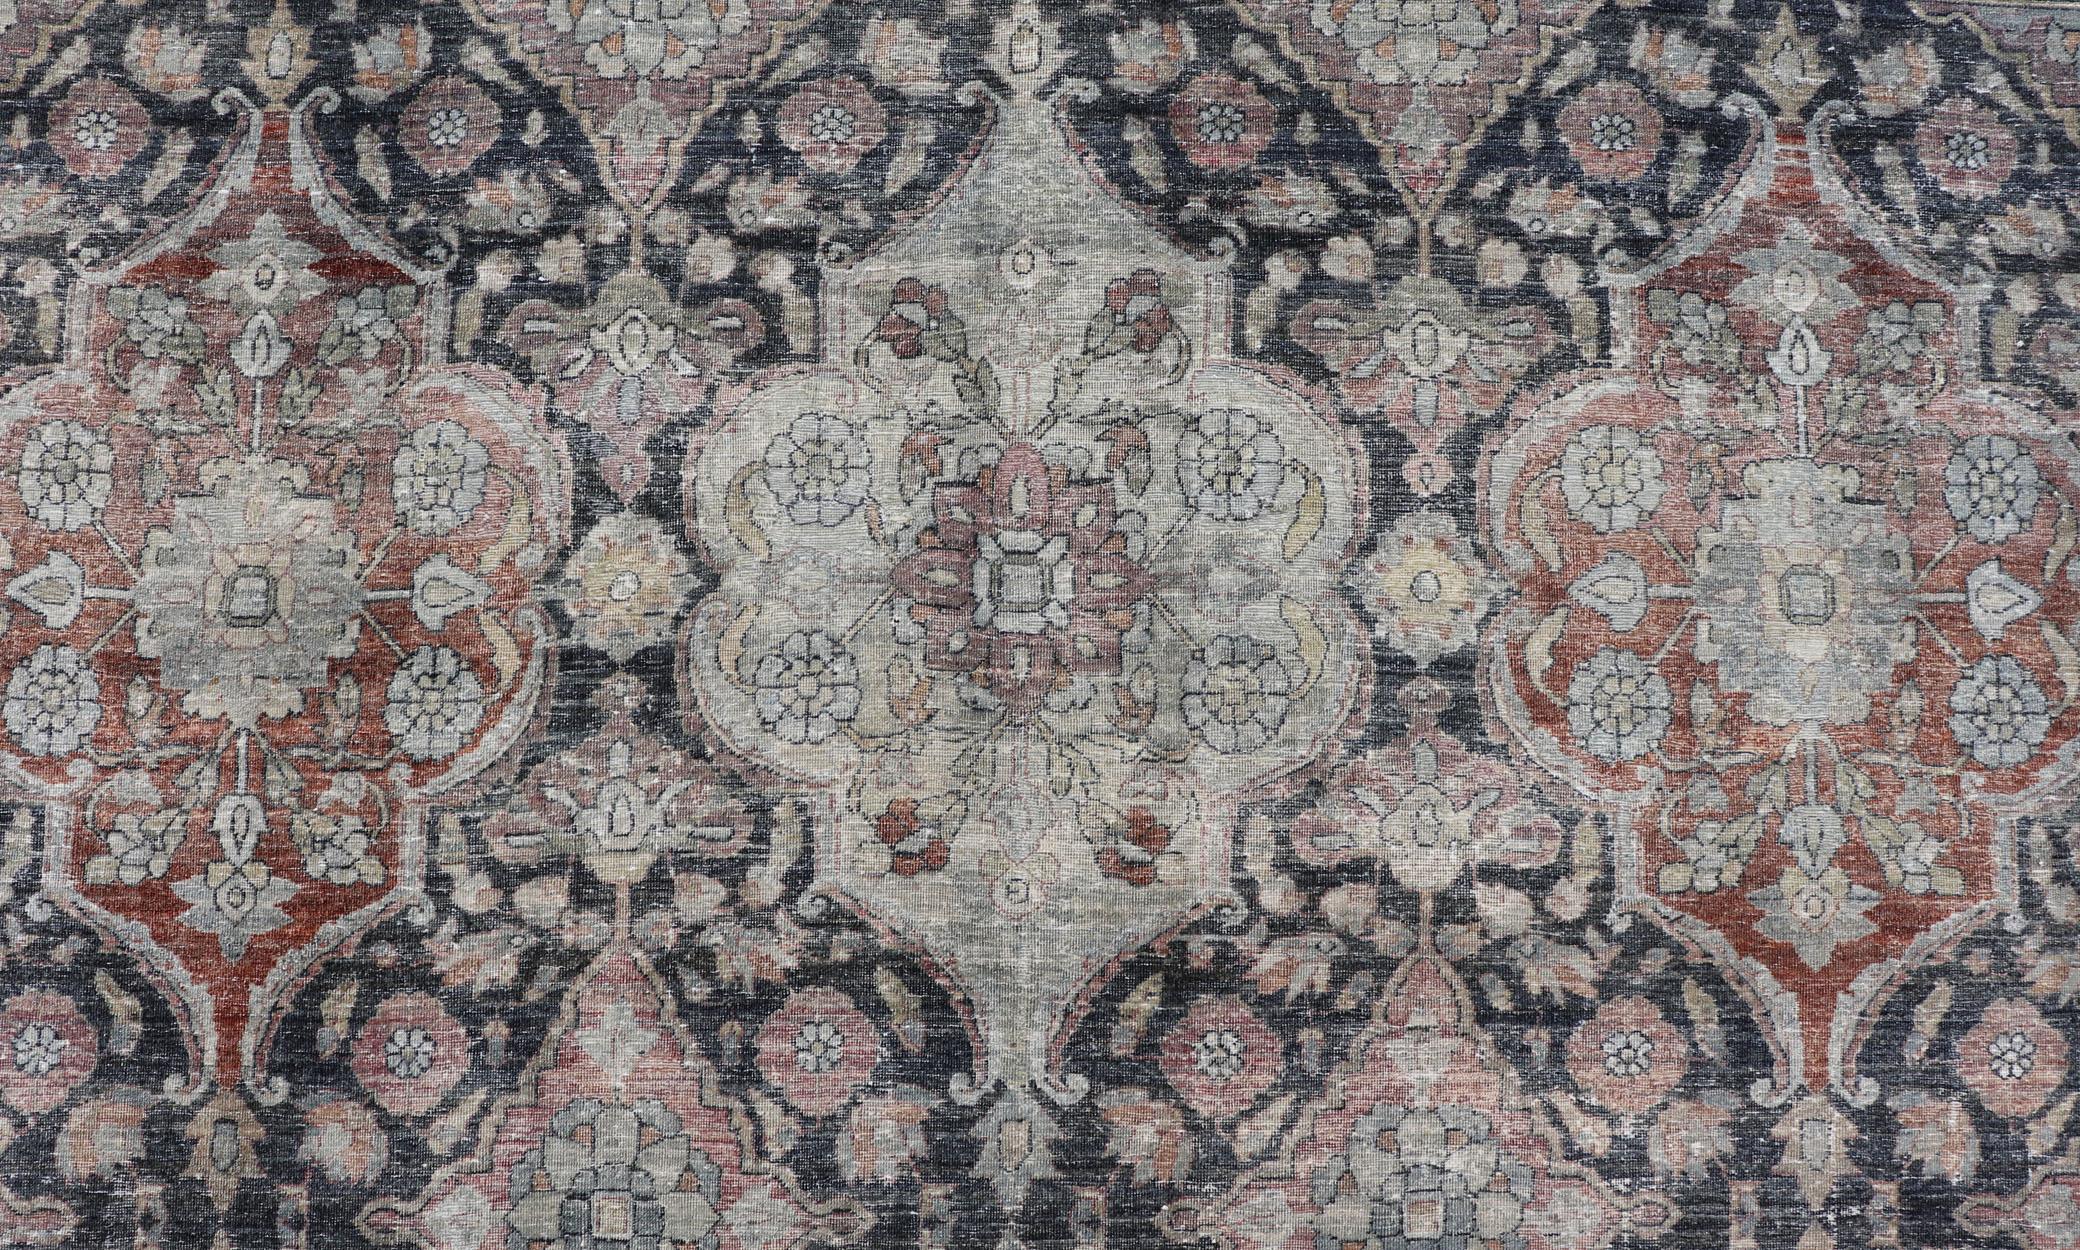 Antique Destressed Persian Yazd Rug in Charcoal, Copper, Warm Gray, Taupe & Rose For Sale 1